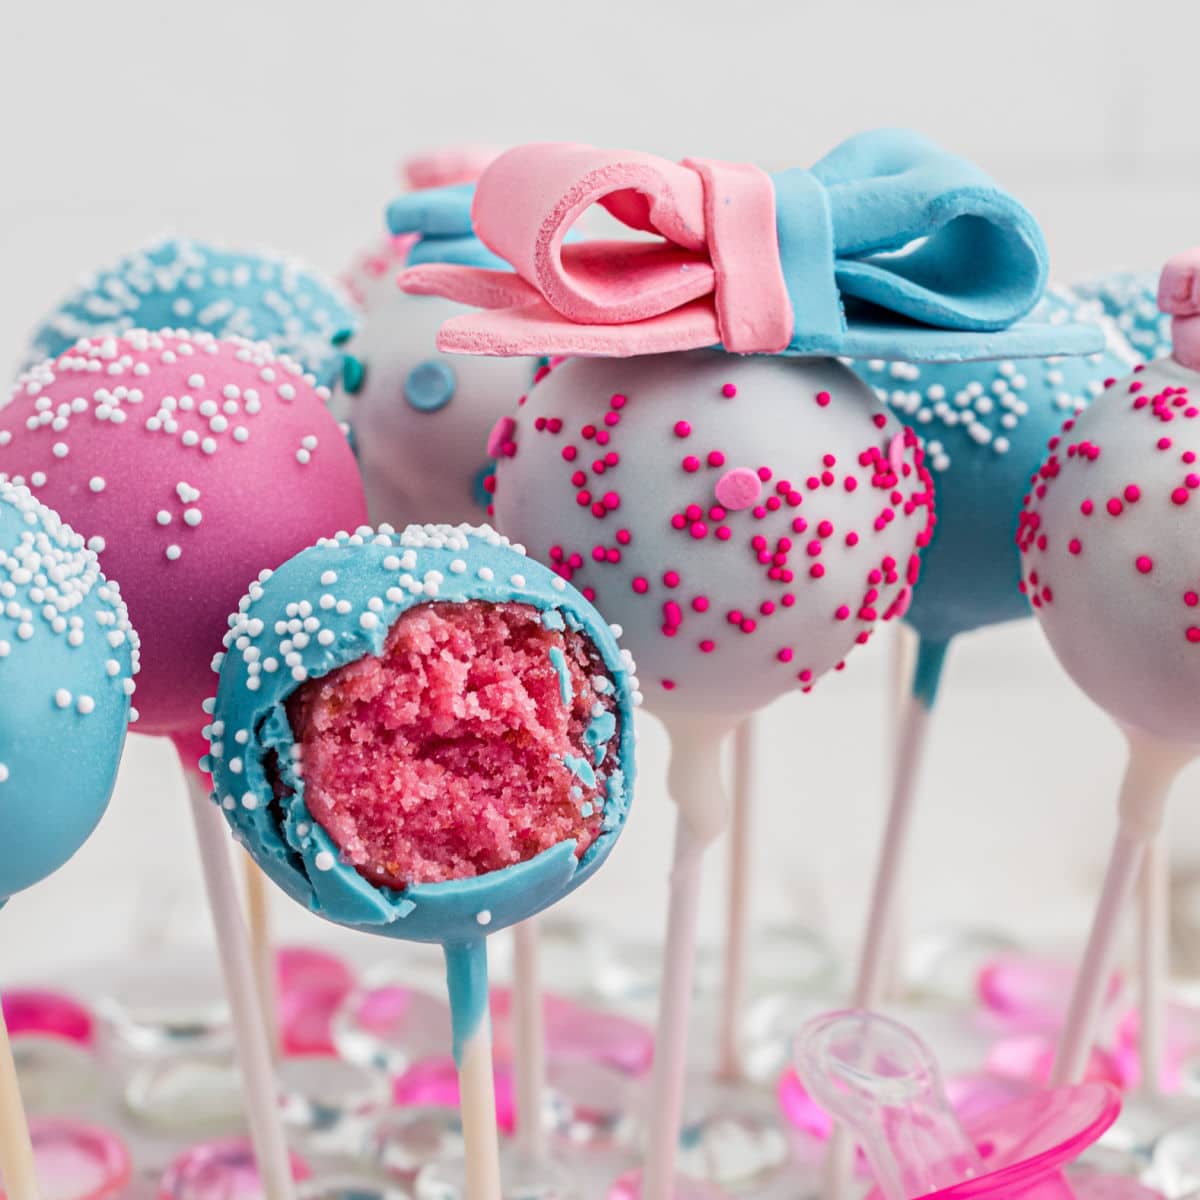 Assimilatie alliantie oorlog How to Make Gender Reveal Cake Pops For a Baby Shower - Restless Chipotle